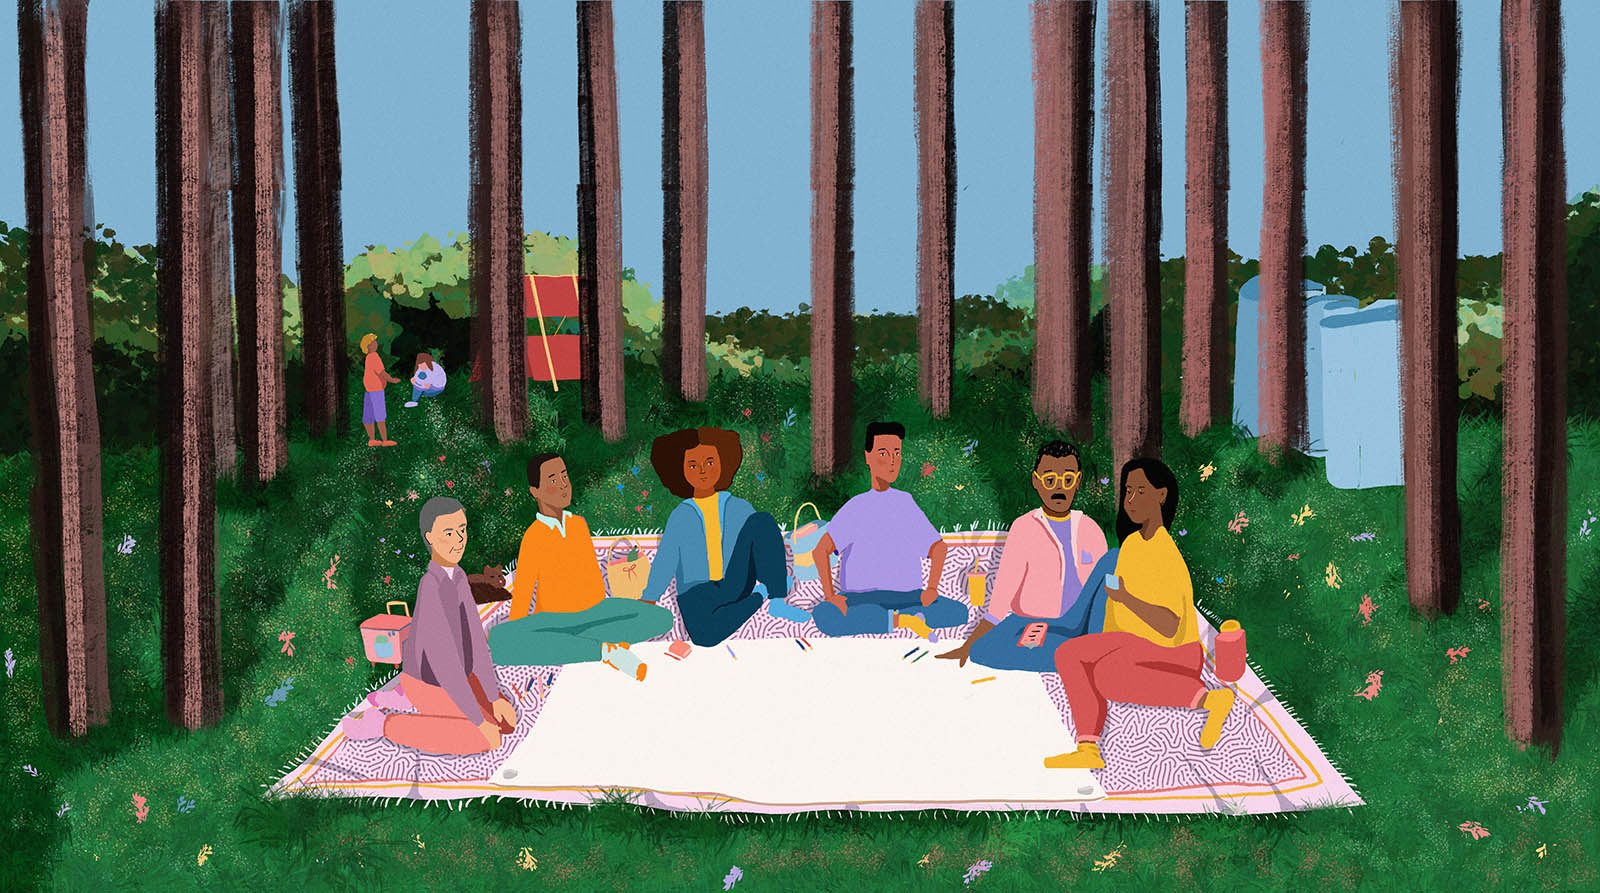 Drawing of people having a picnic in a park, sitting on a blanket